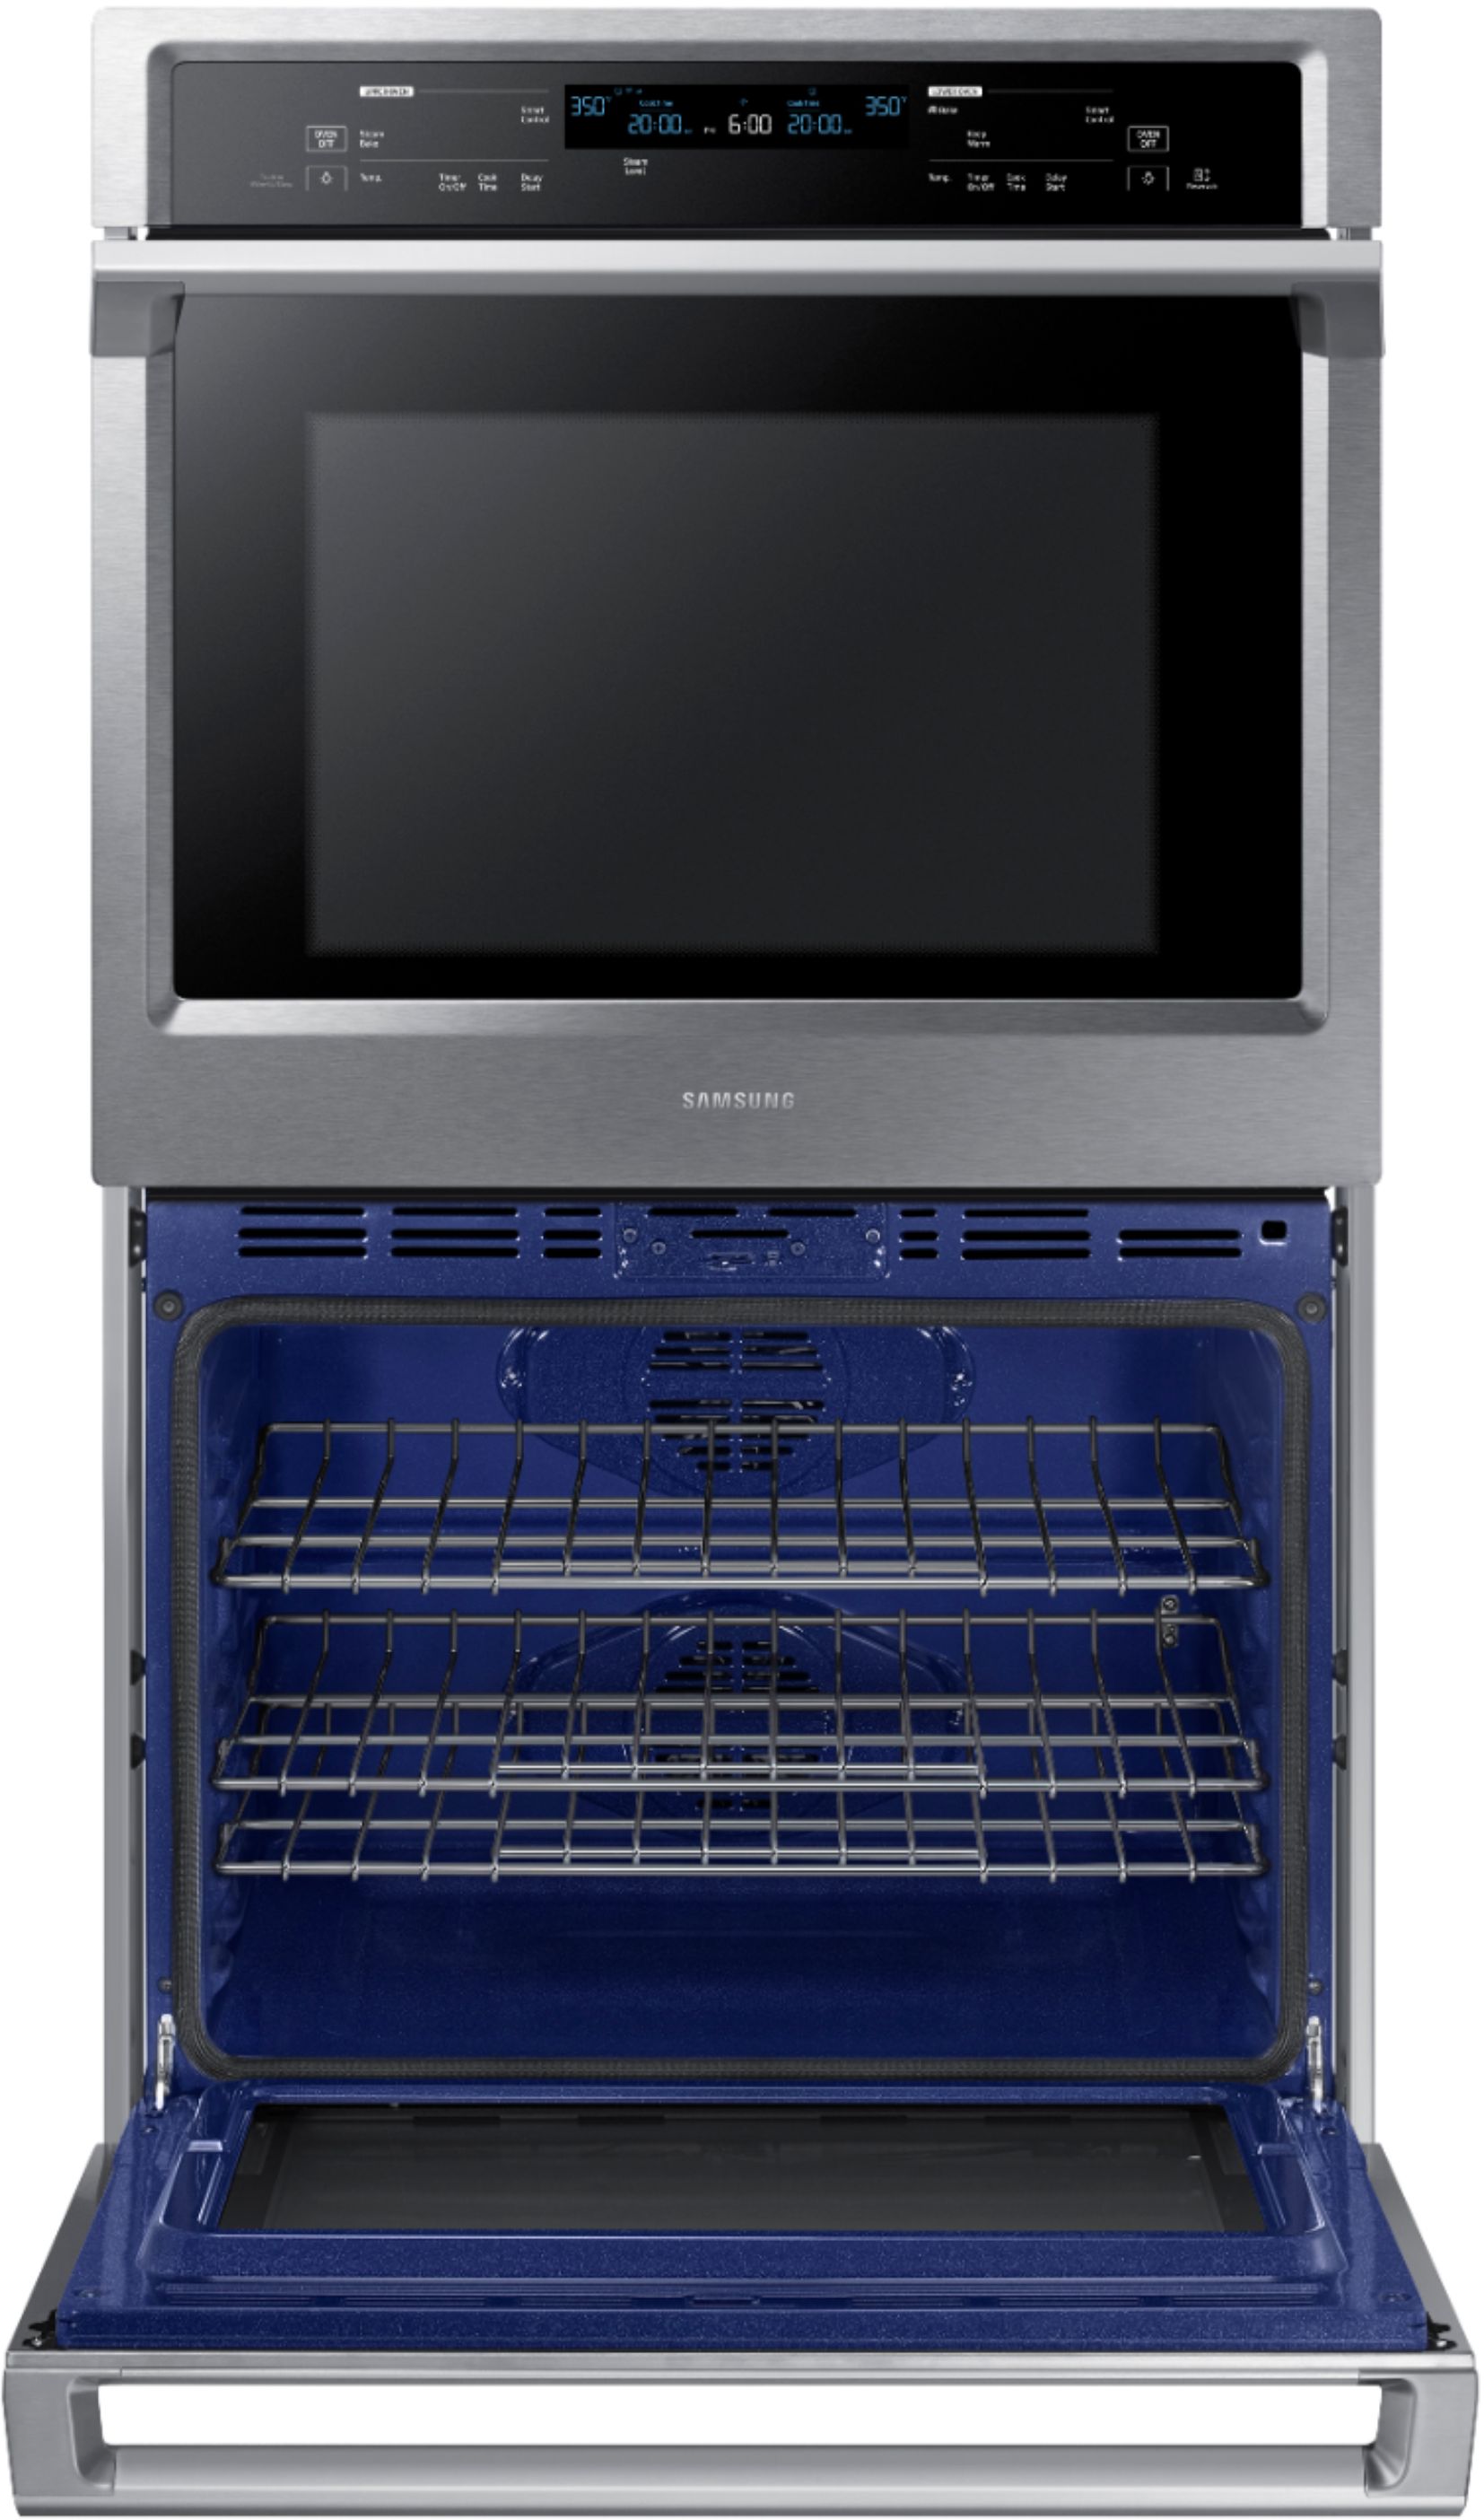 Samsung 30" Double Wall Oven with Steam Cook and WiFi Stainless steel